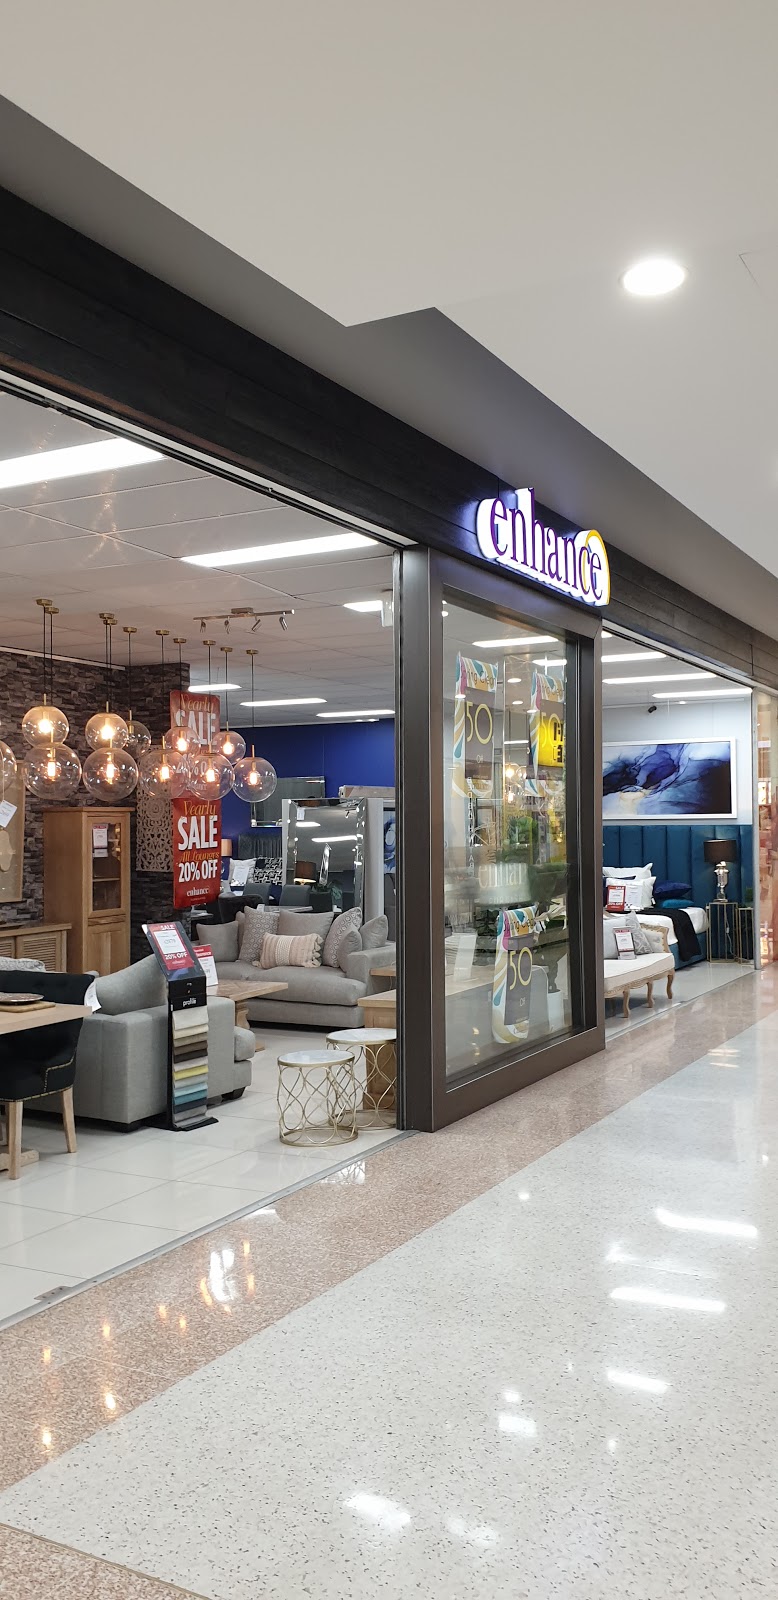 Enhance Furnishing | home goods store | 15/18 Victoria Ave, Castle Hill NSW 2154, Australia | 0288501992 OR +61 2 8850 1992